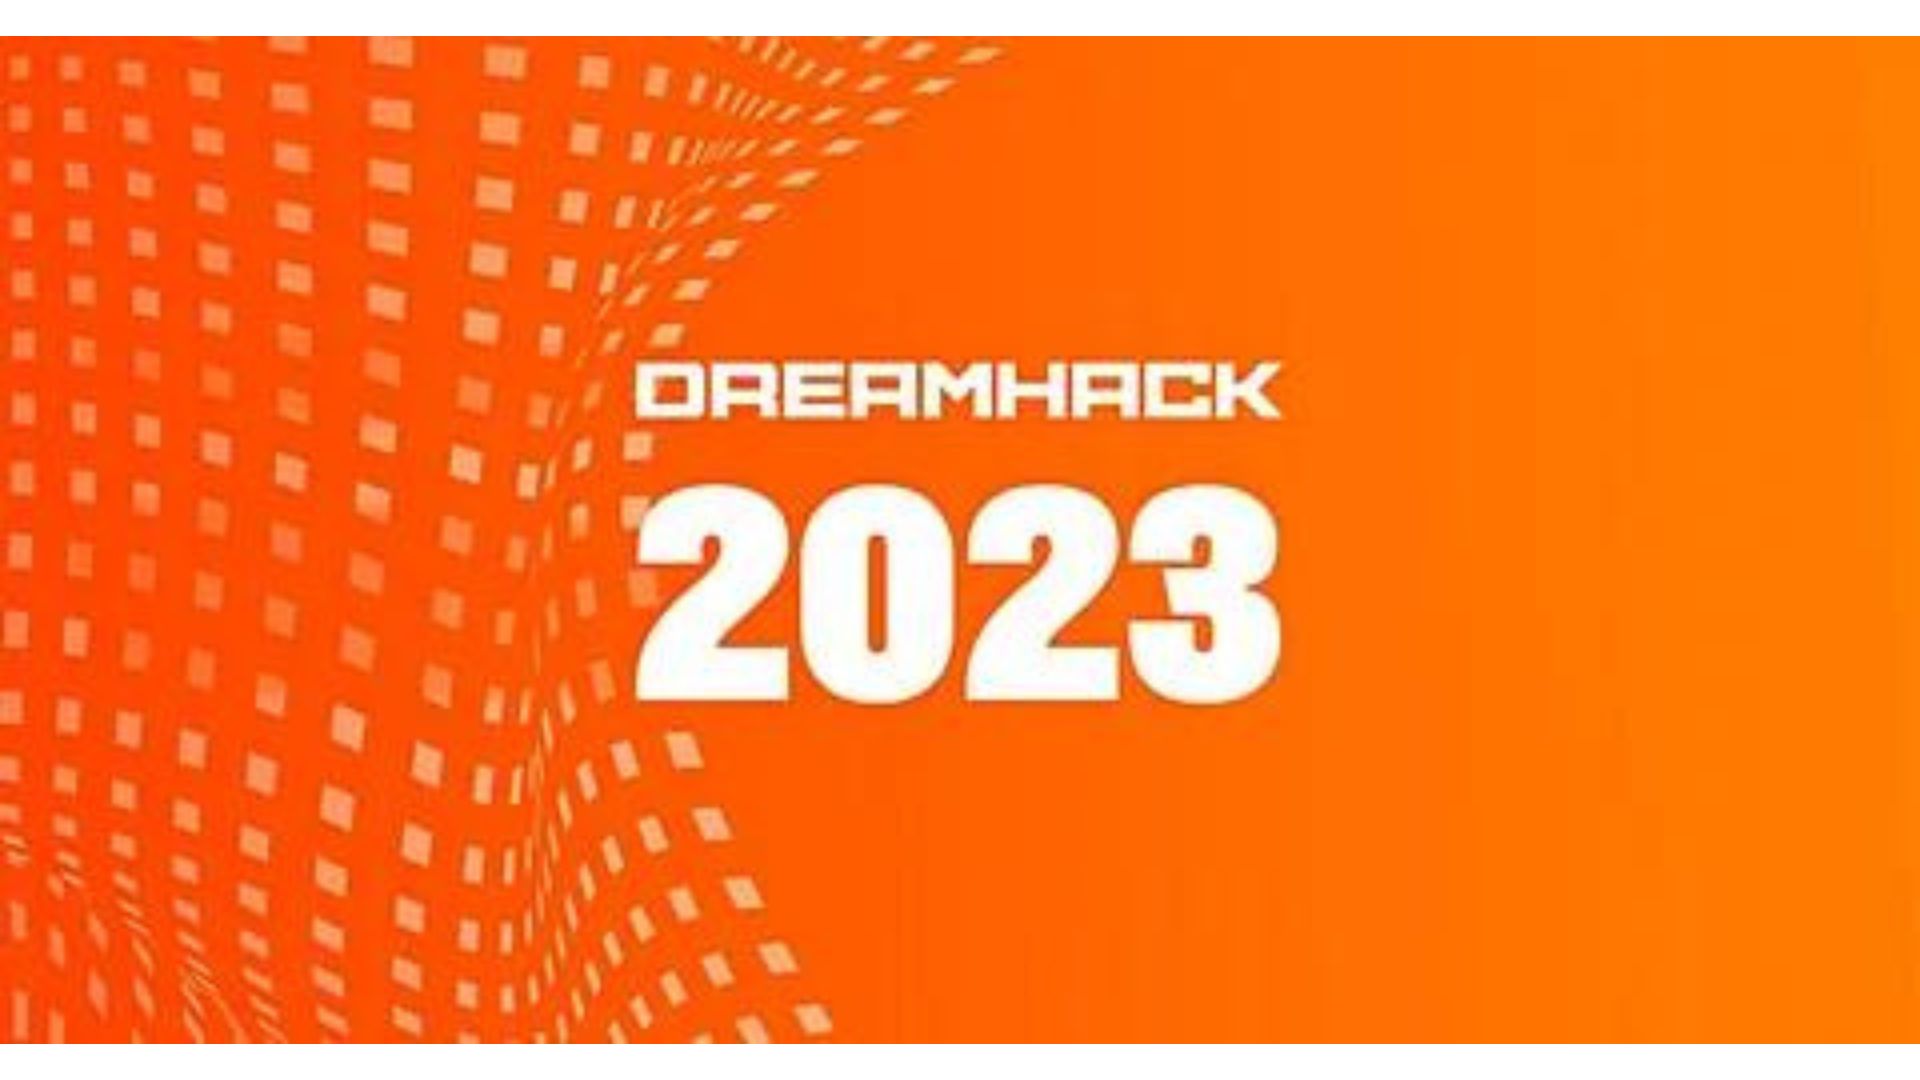 DreamHack Returns To Hyderabad in 2023: Schedule And Dates Announced